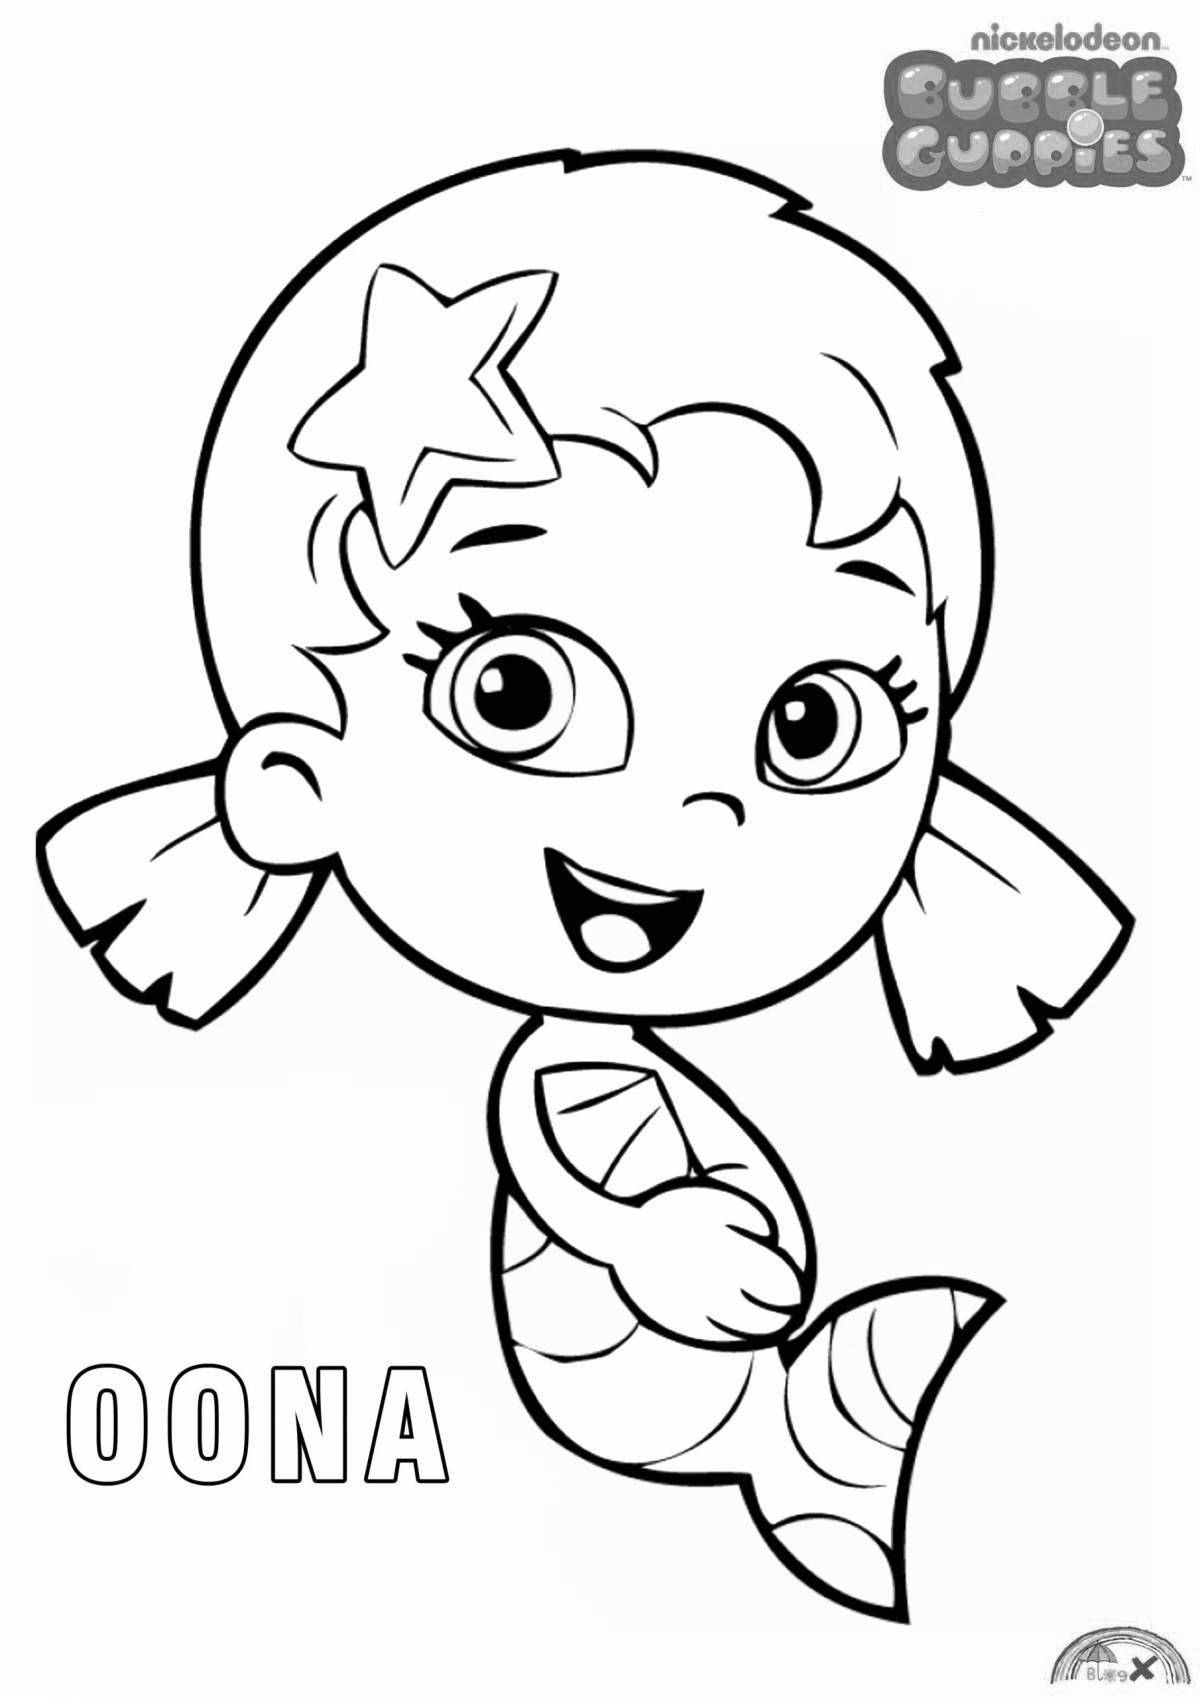 Glowing guppies coloring page